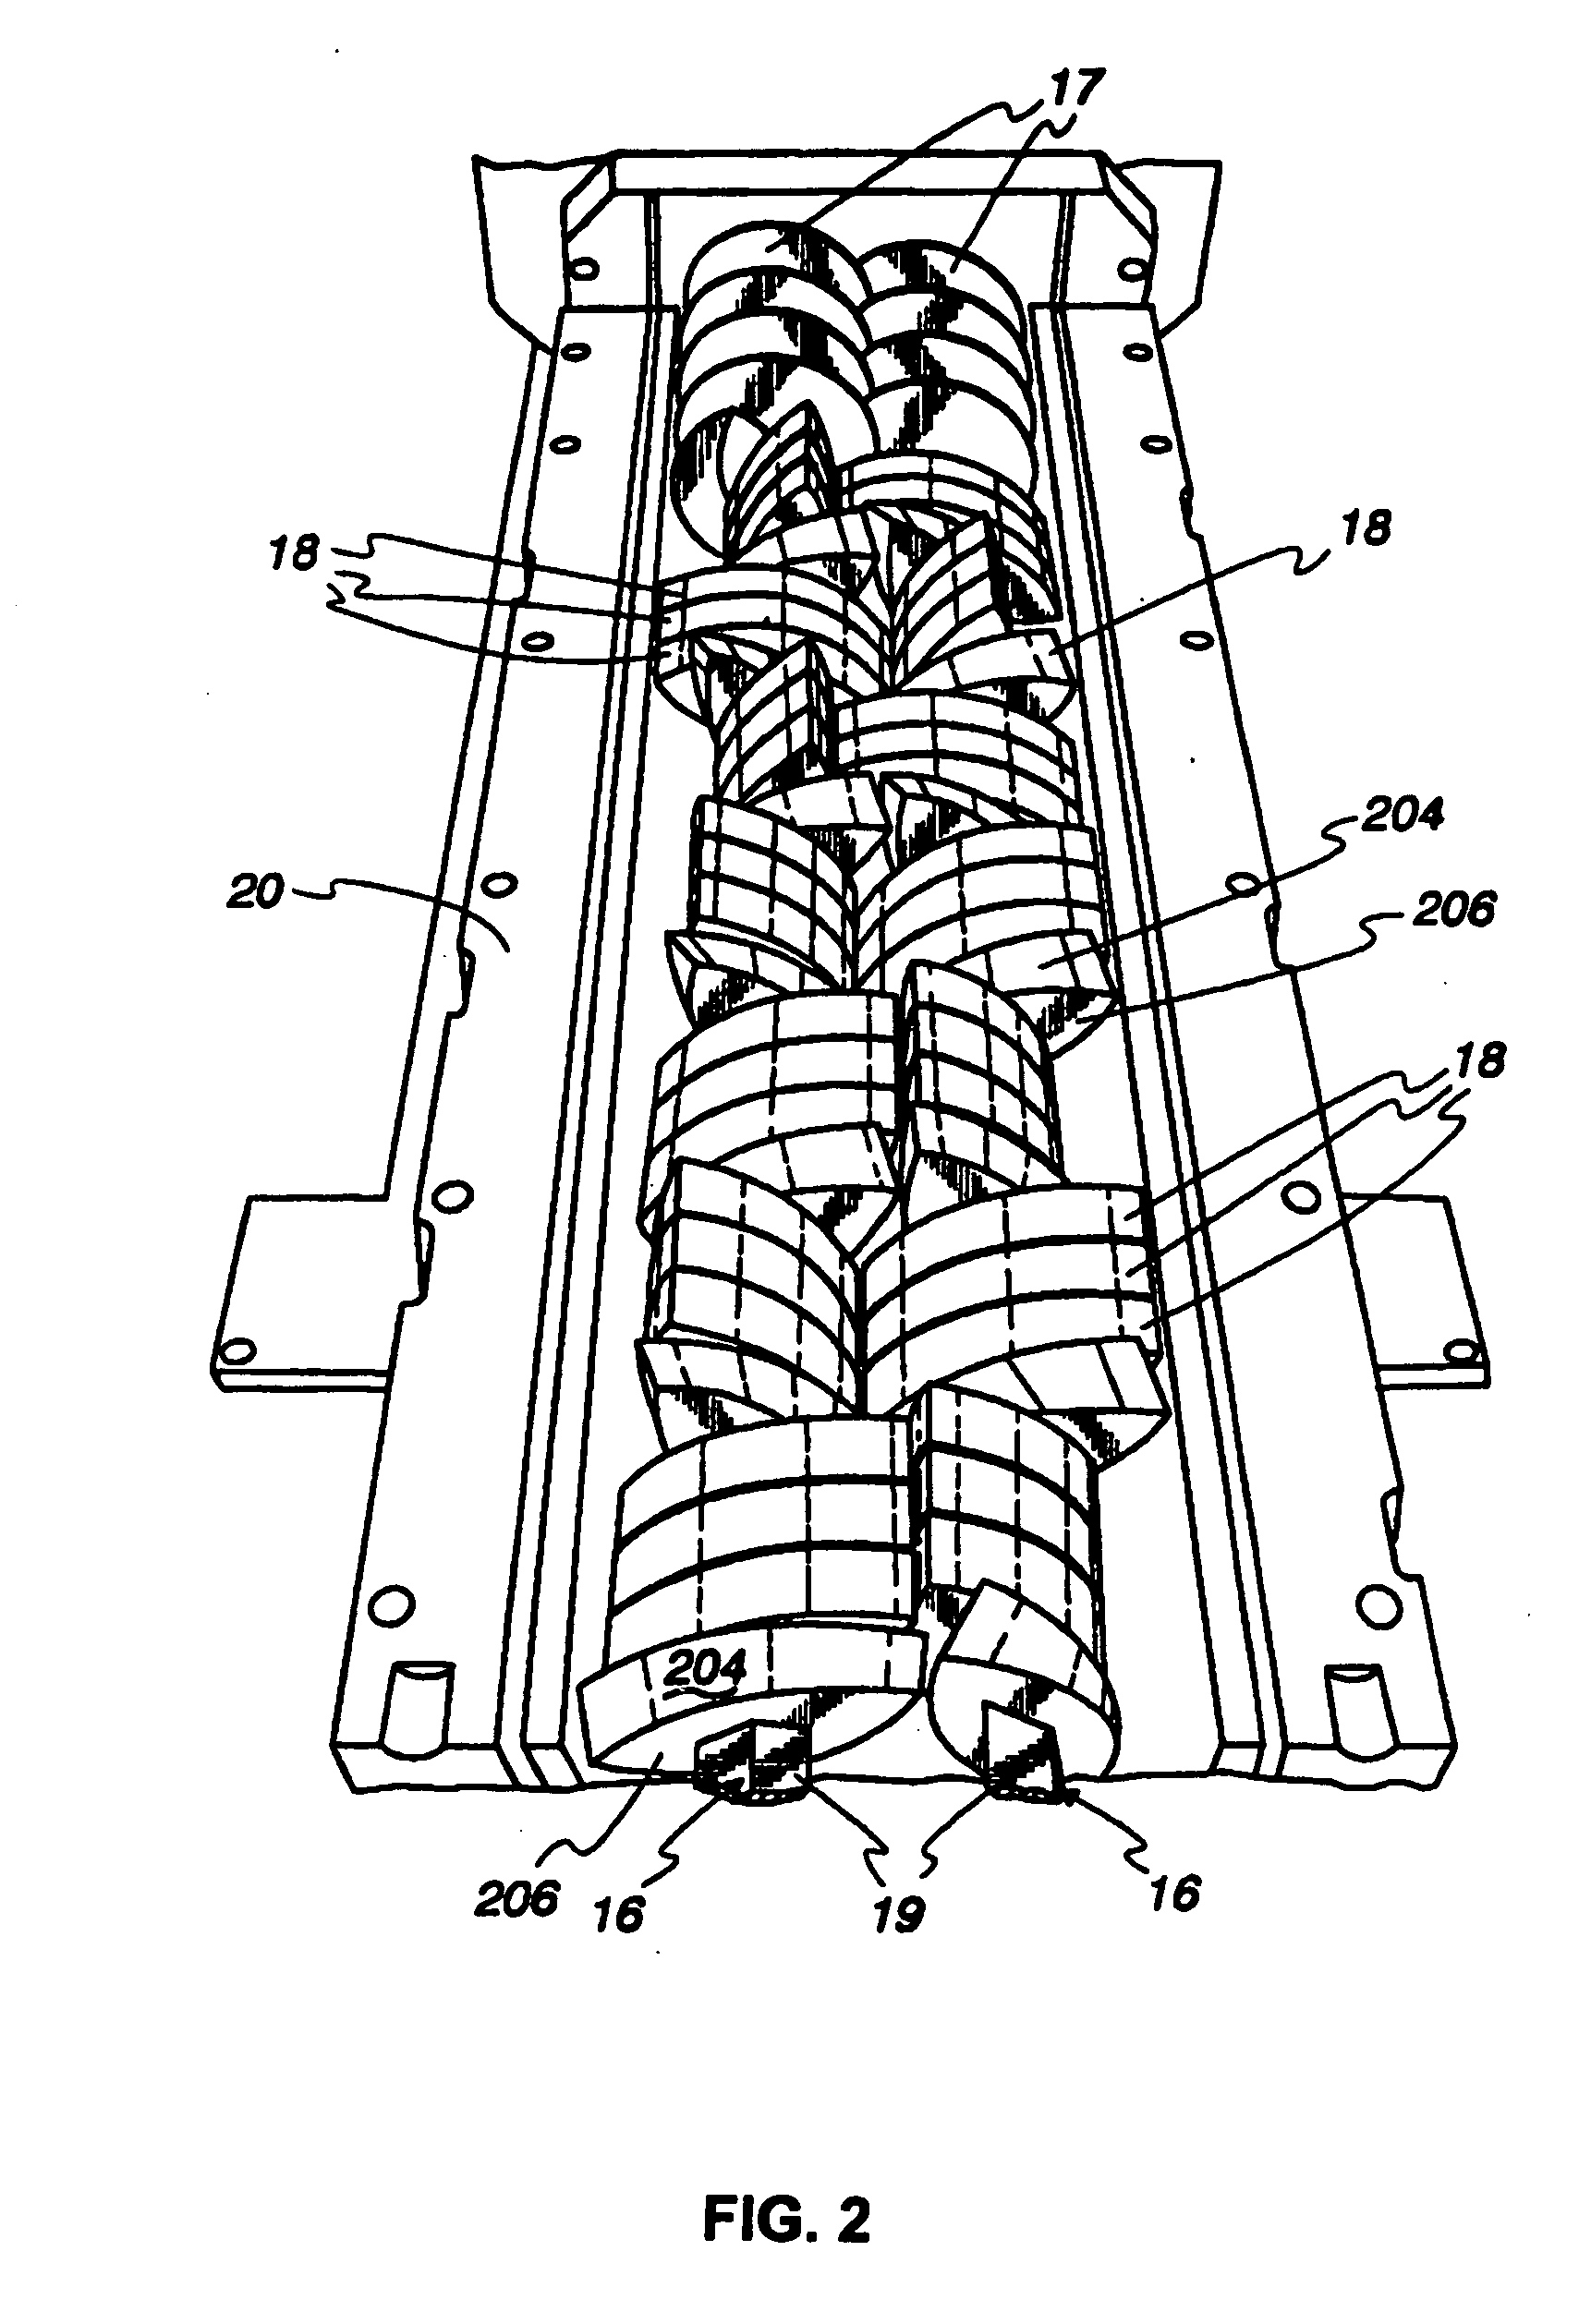 Meat processing system